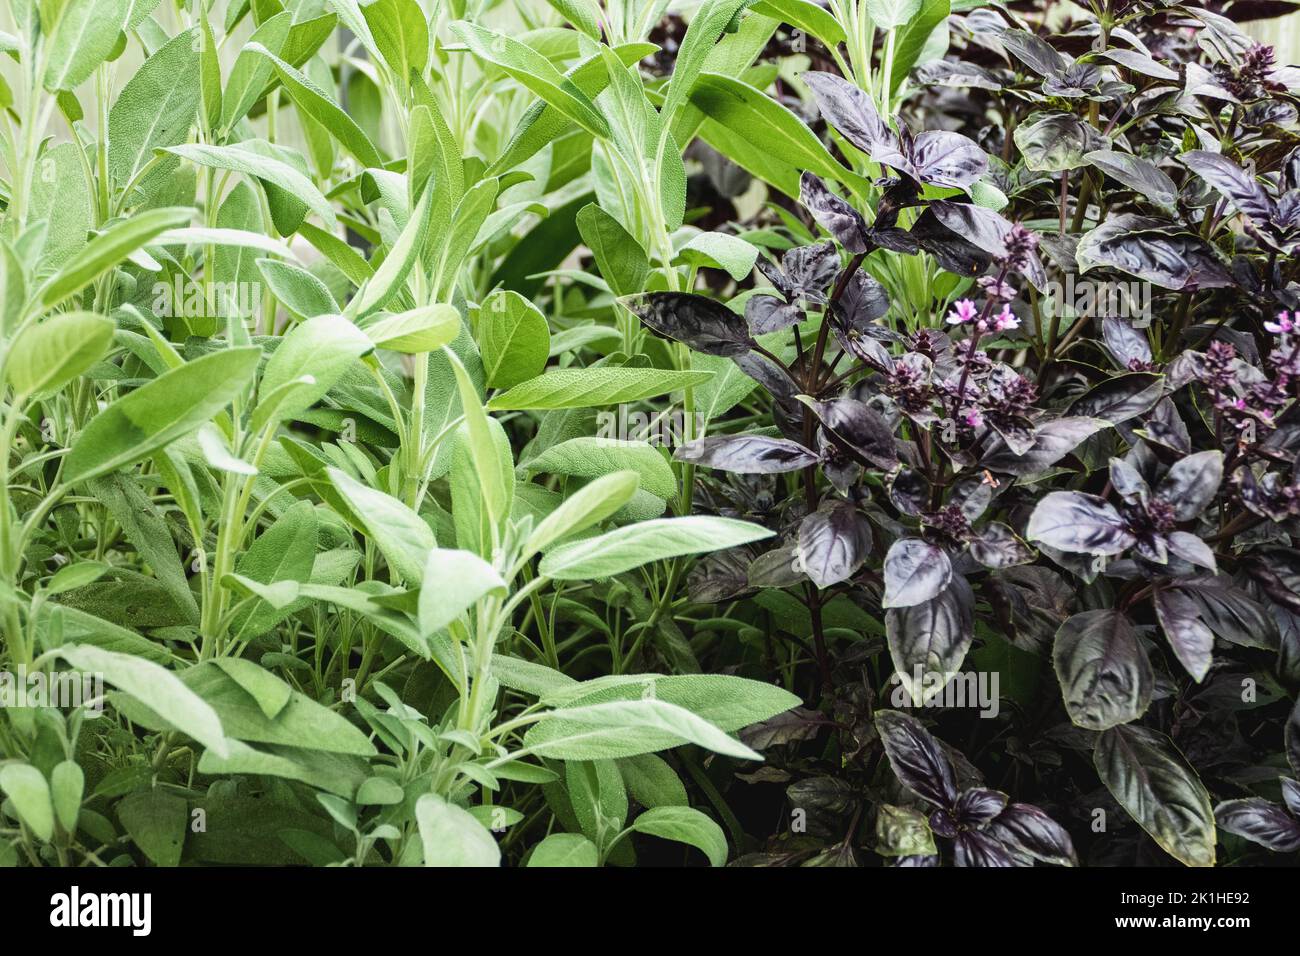 Sage and Basil plants growing in herb garden Stock Photo